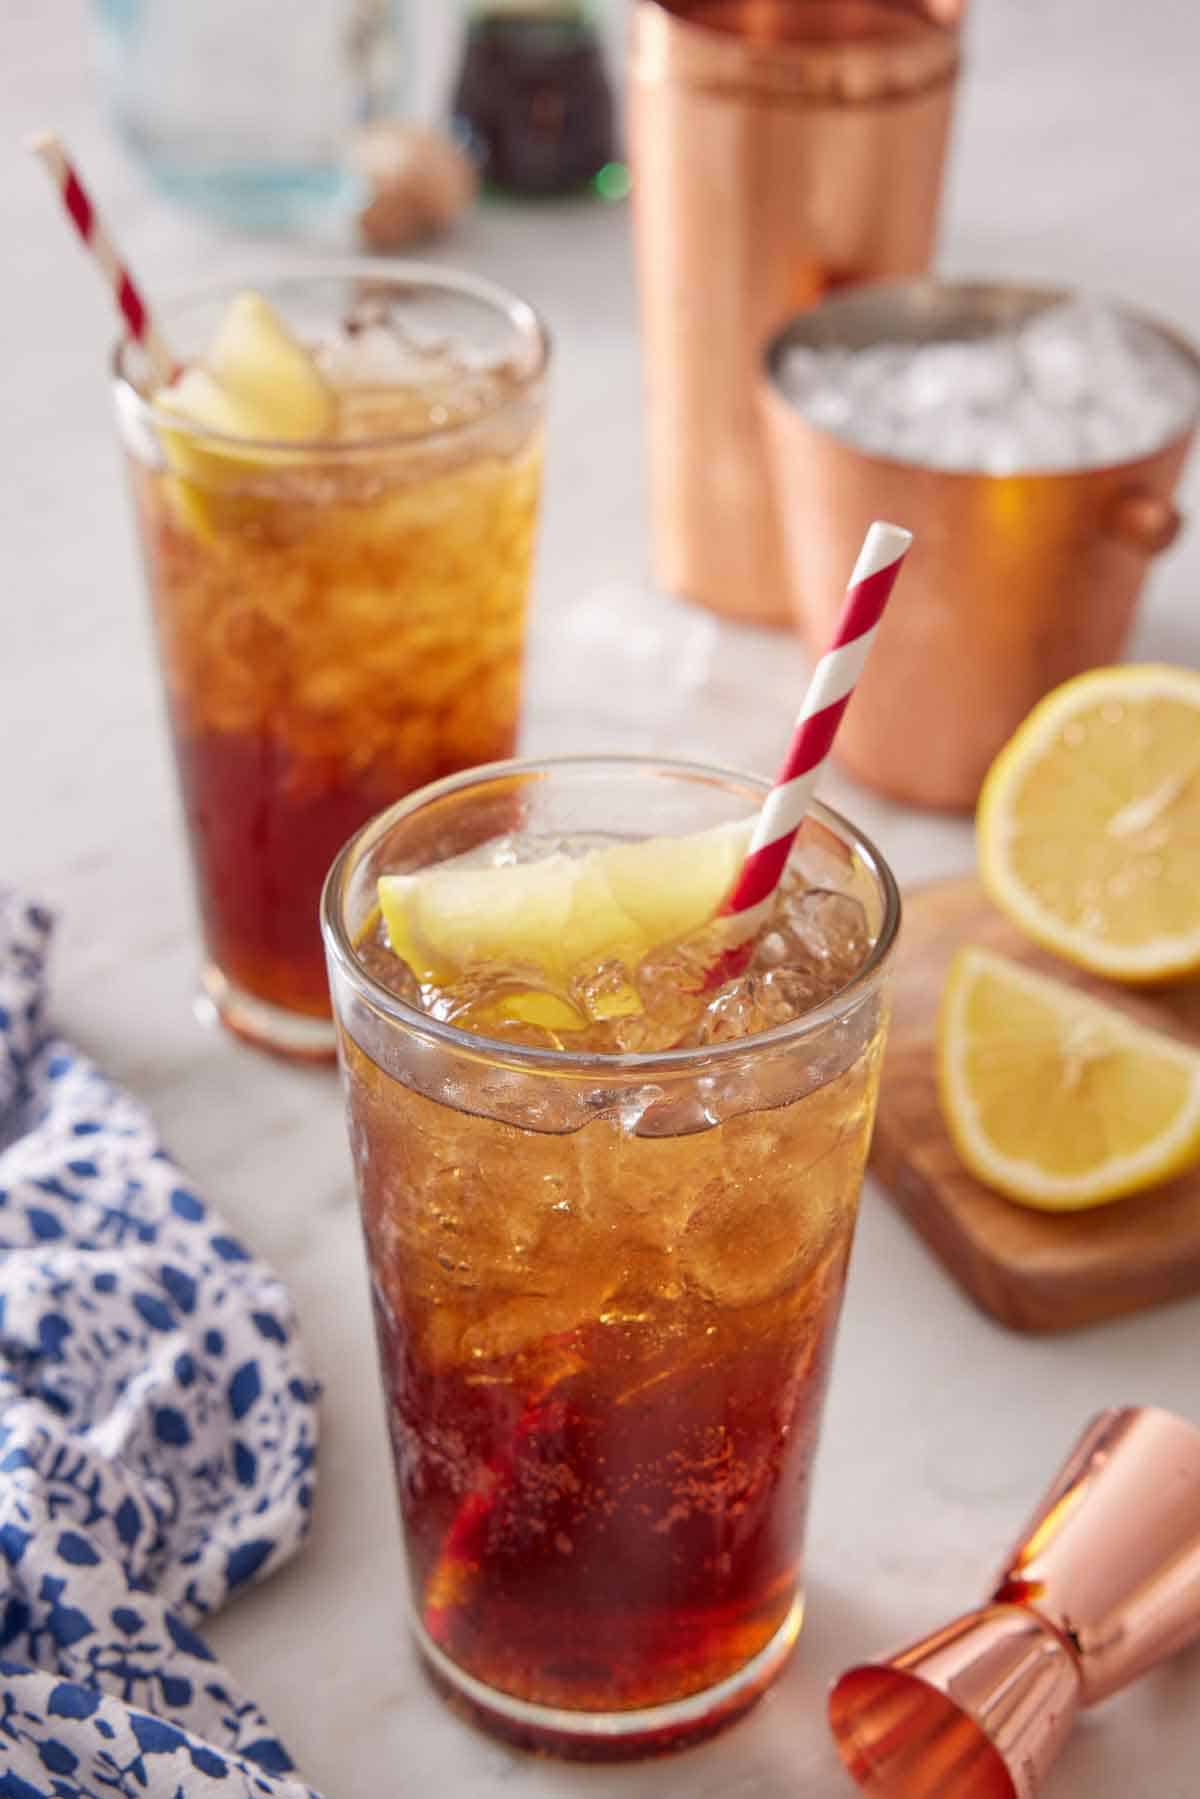 Two glasses of Long Island Iced Tea with sliced lemon and straws. Lemon lemons and ice in the background with a shaker and jigger.